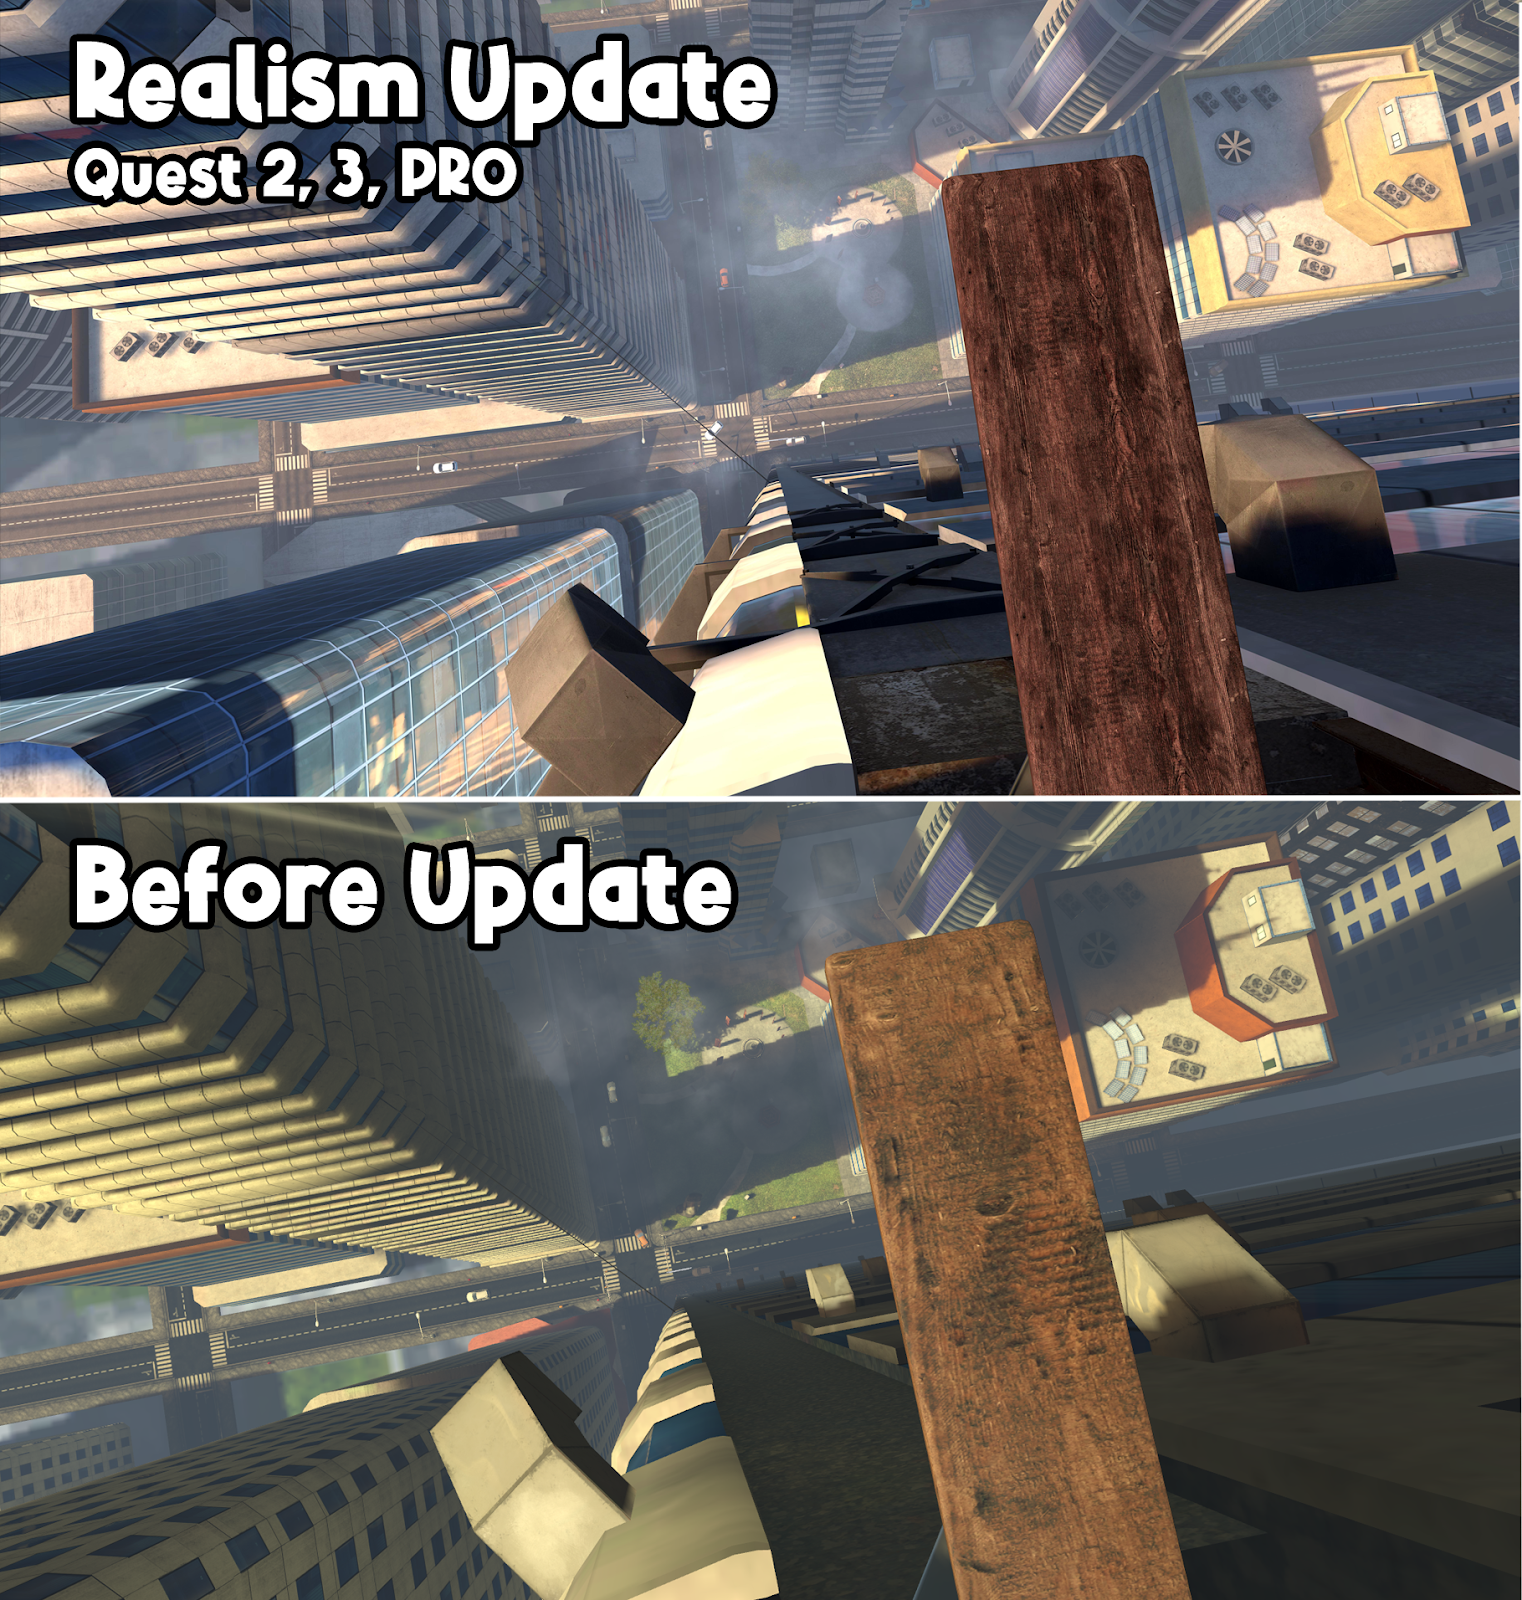 Richie's Plank Experience - Top half of image shows realism update visuals on Quest 2, Pro, 3. Bottom half shows visuals before update